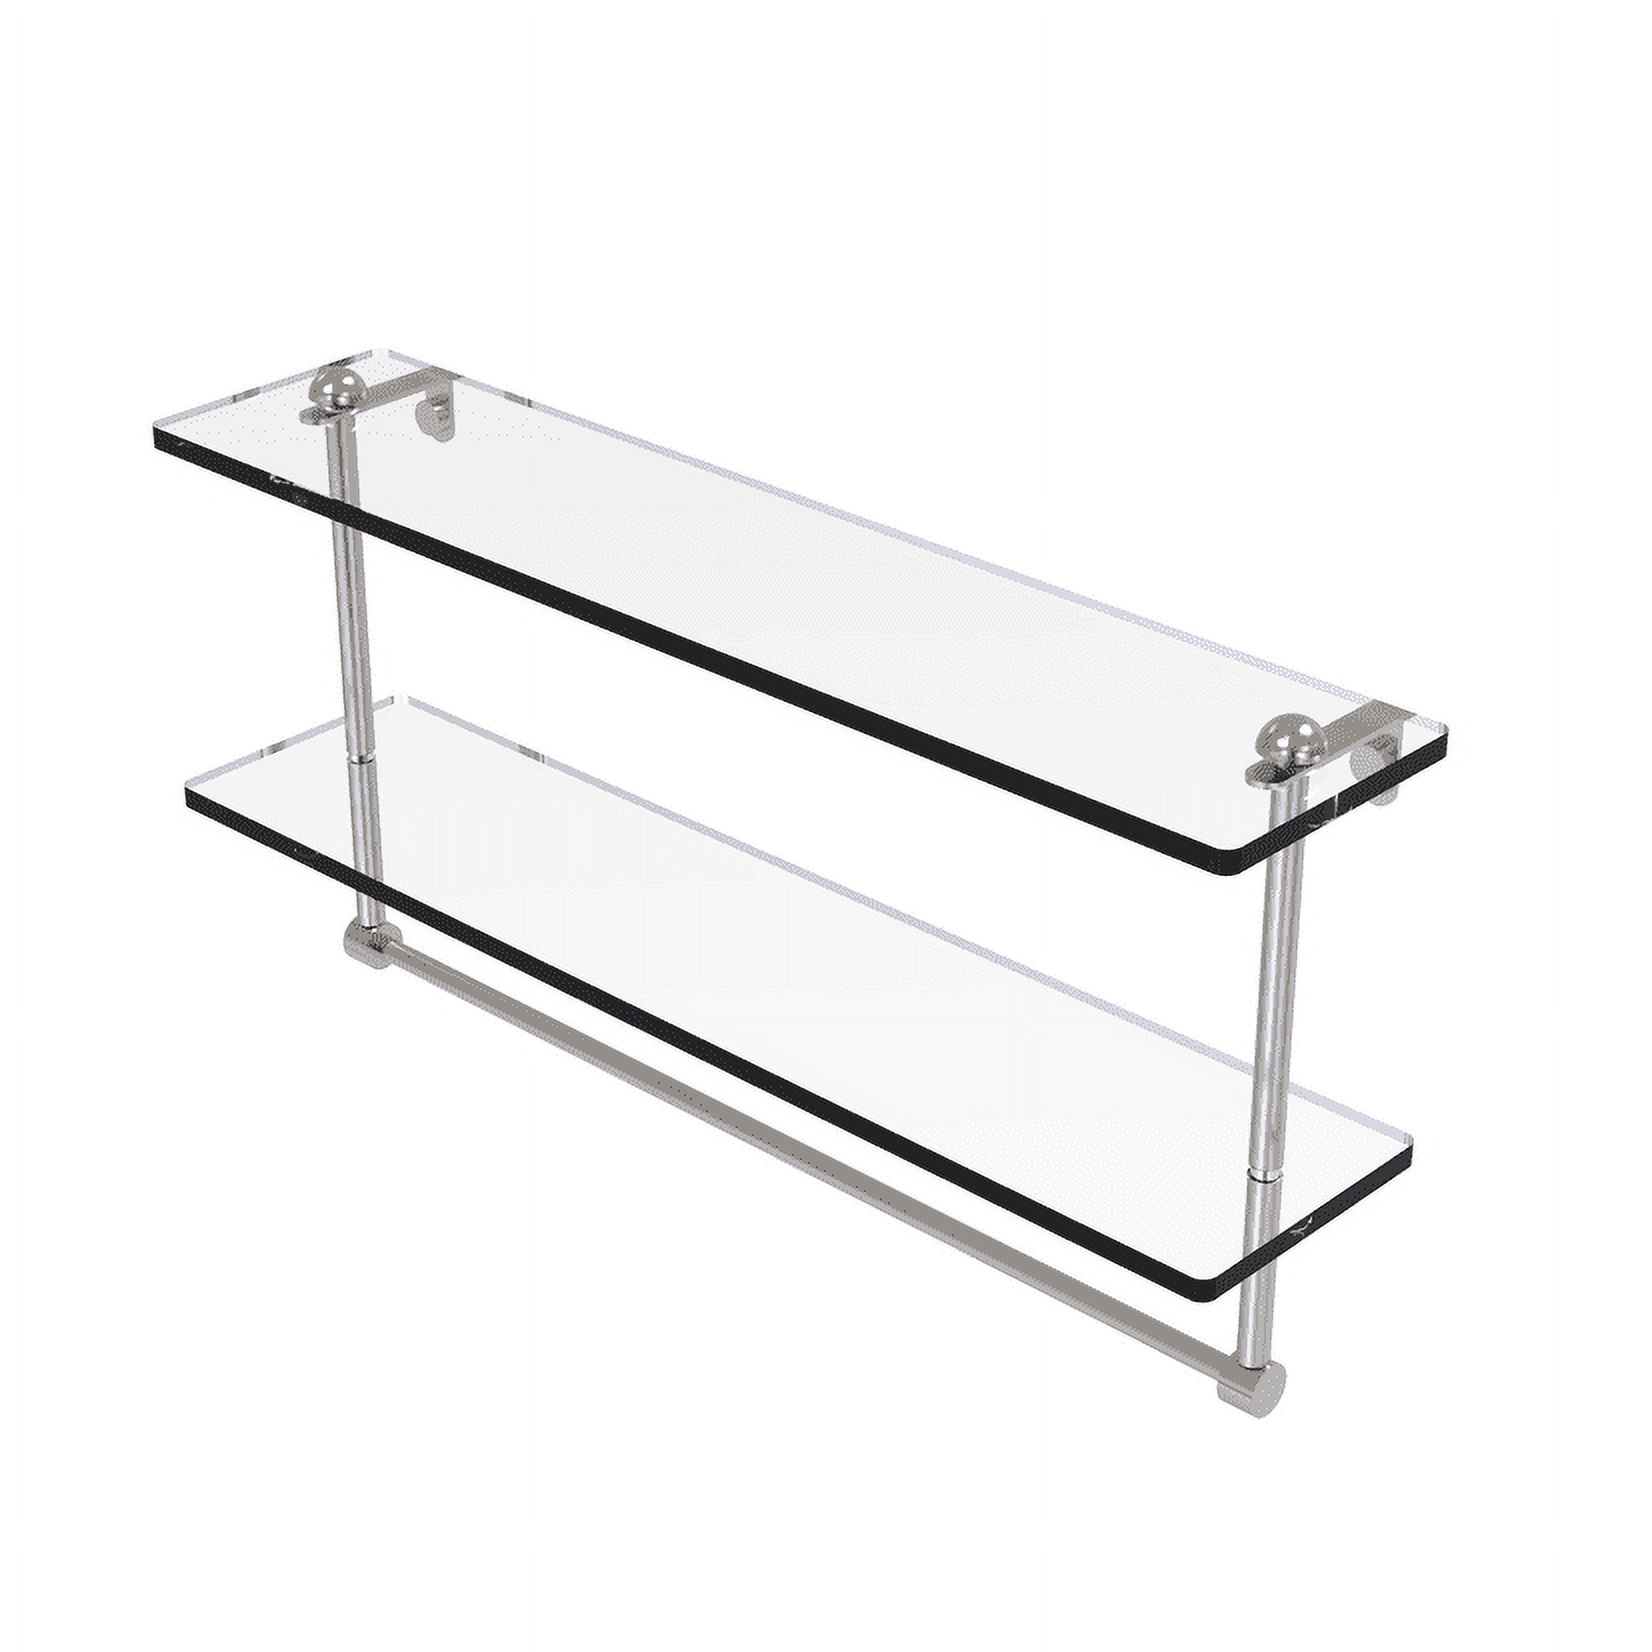 22-in Two Tiered Glass Shelf with Integrated Towel Bar in Satin Nickel - image 1 of 2